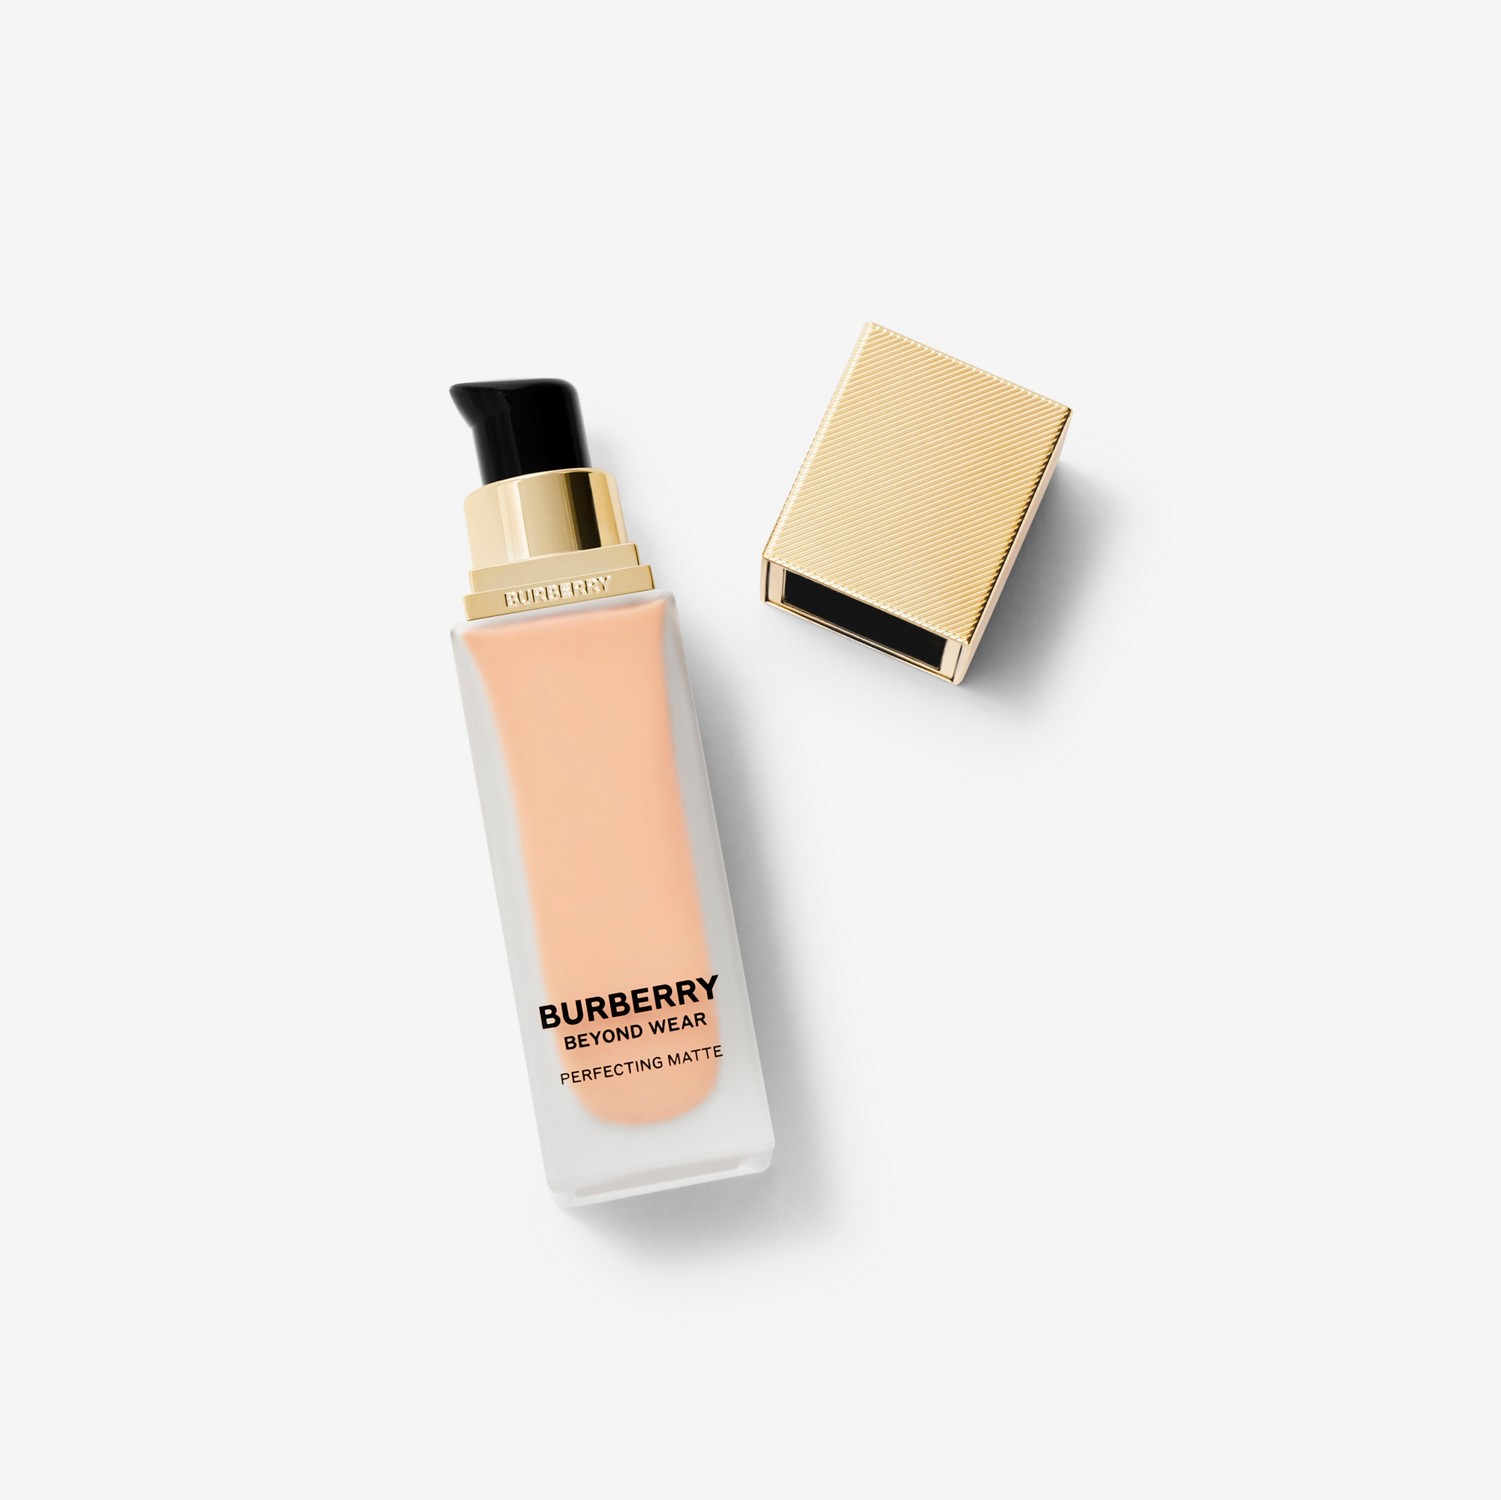 Beyond Wear Perfecting Matte Foundation – 30 Light Cool - Mulheres | Burberry® oficial